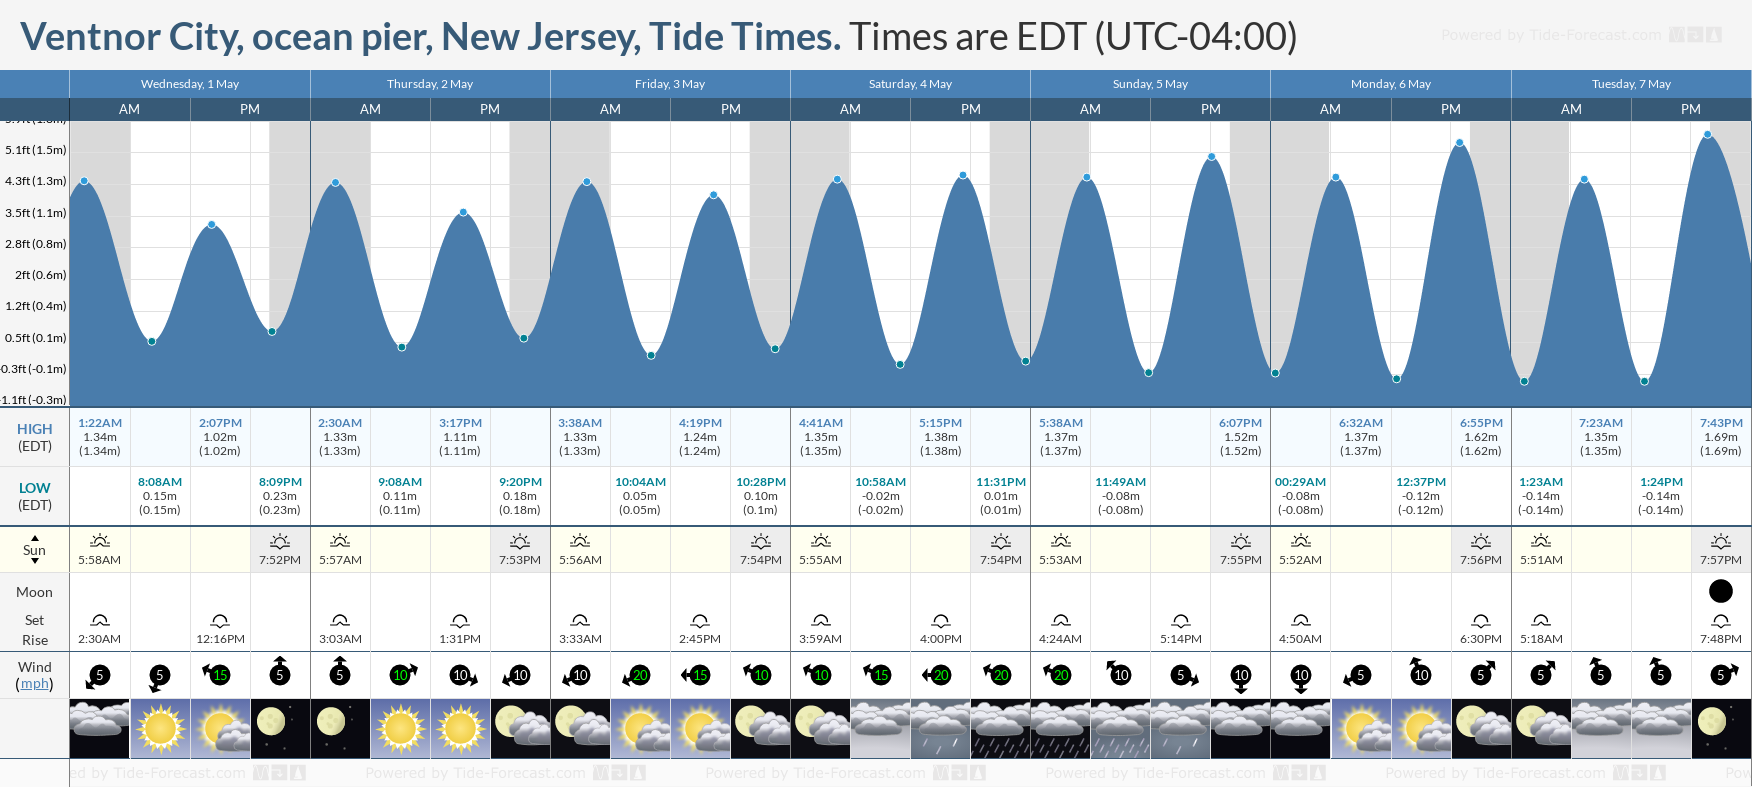 Ventnor City, ocean pier, New Jersey Tide Chart including high and low tide times for the next 7 days